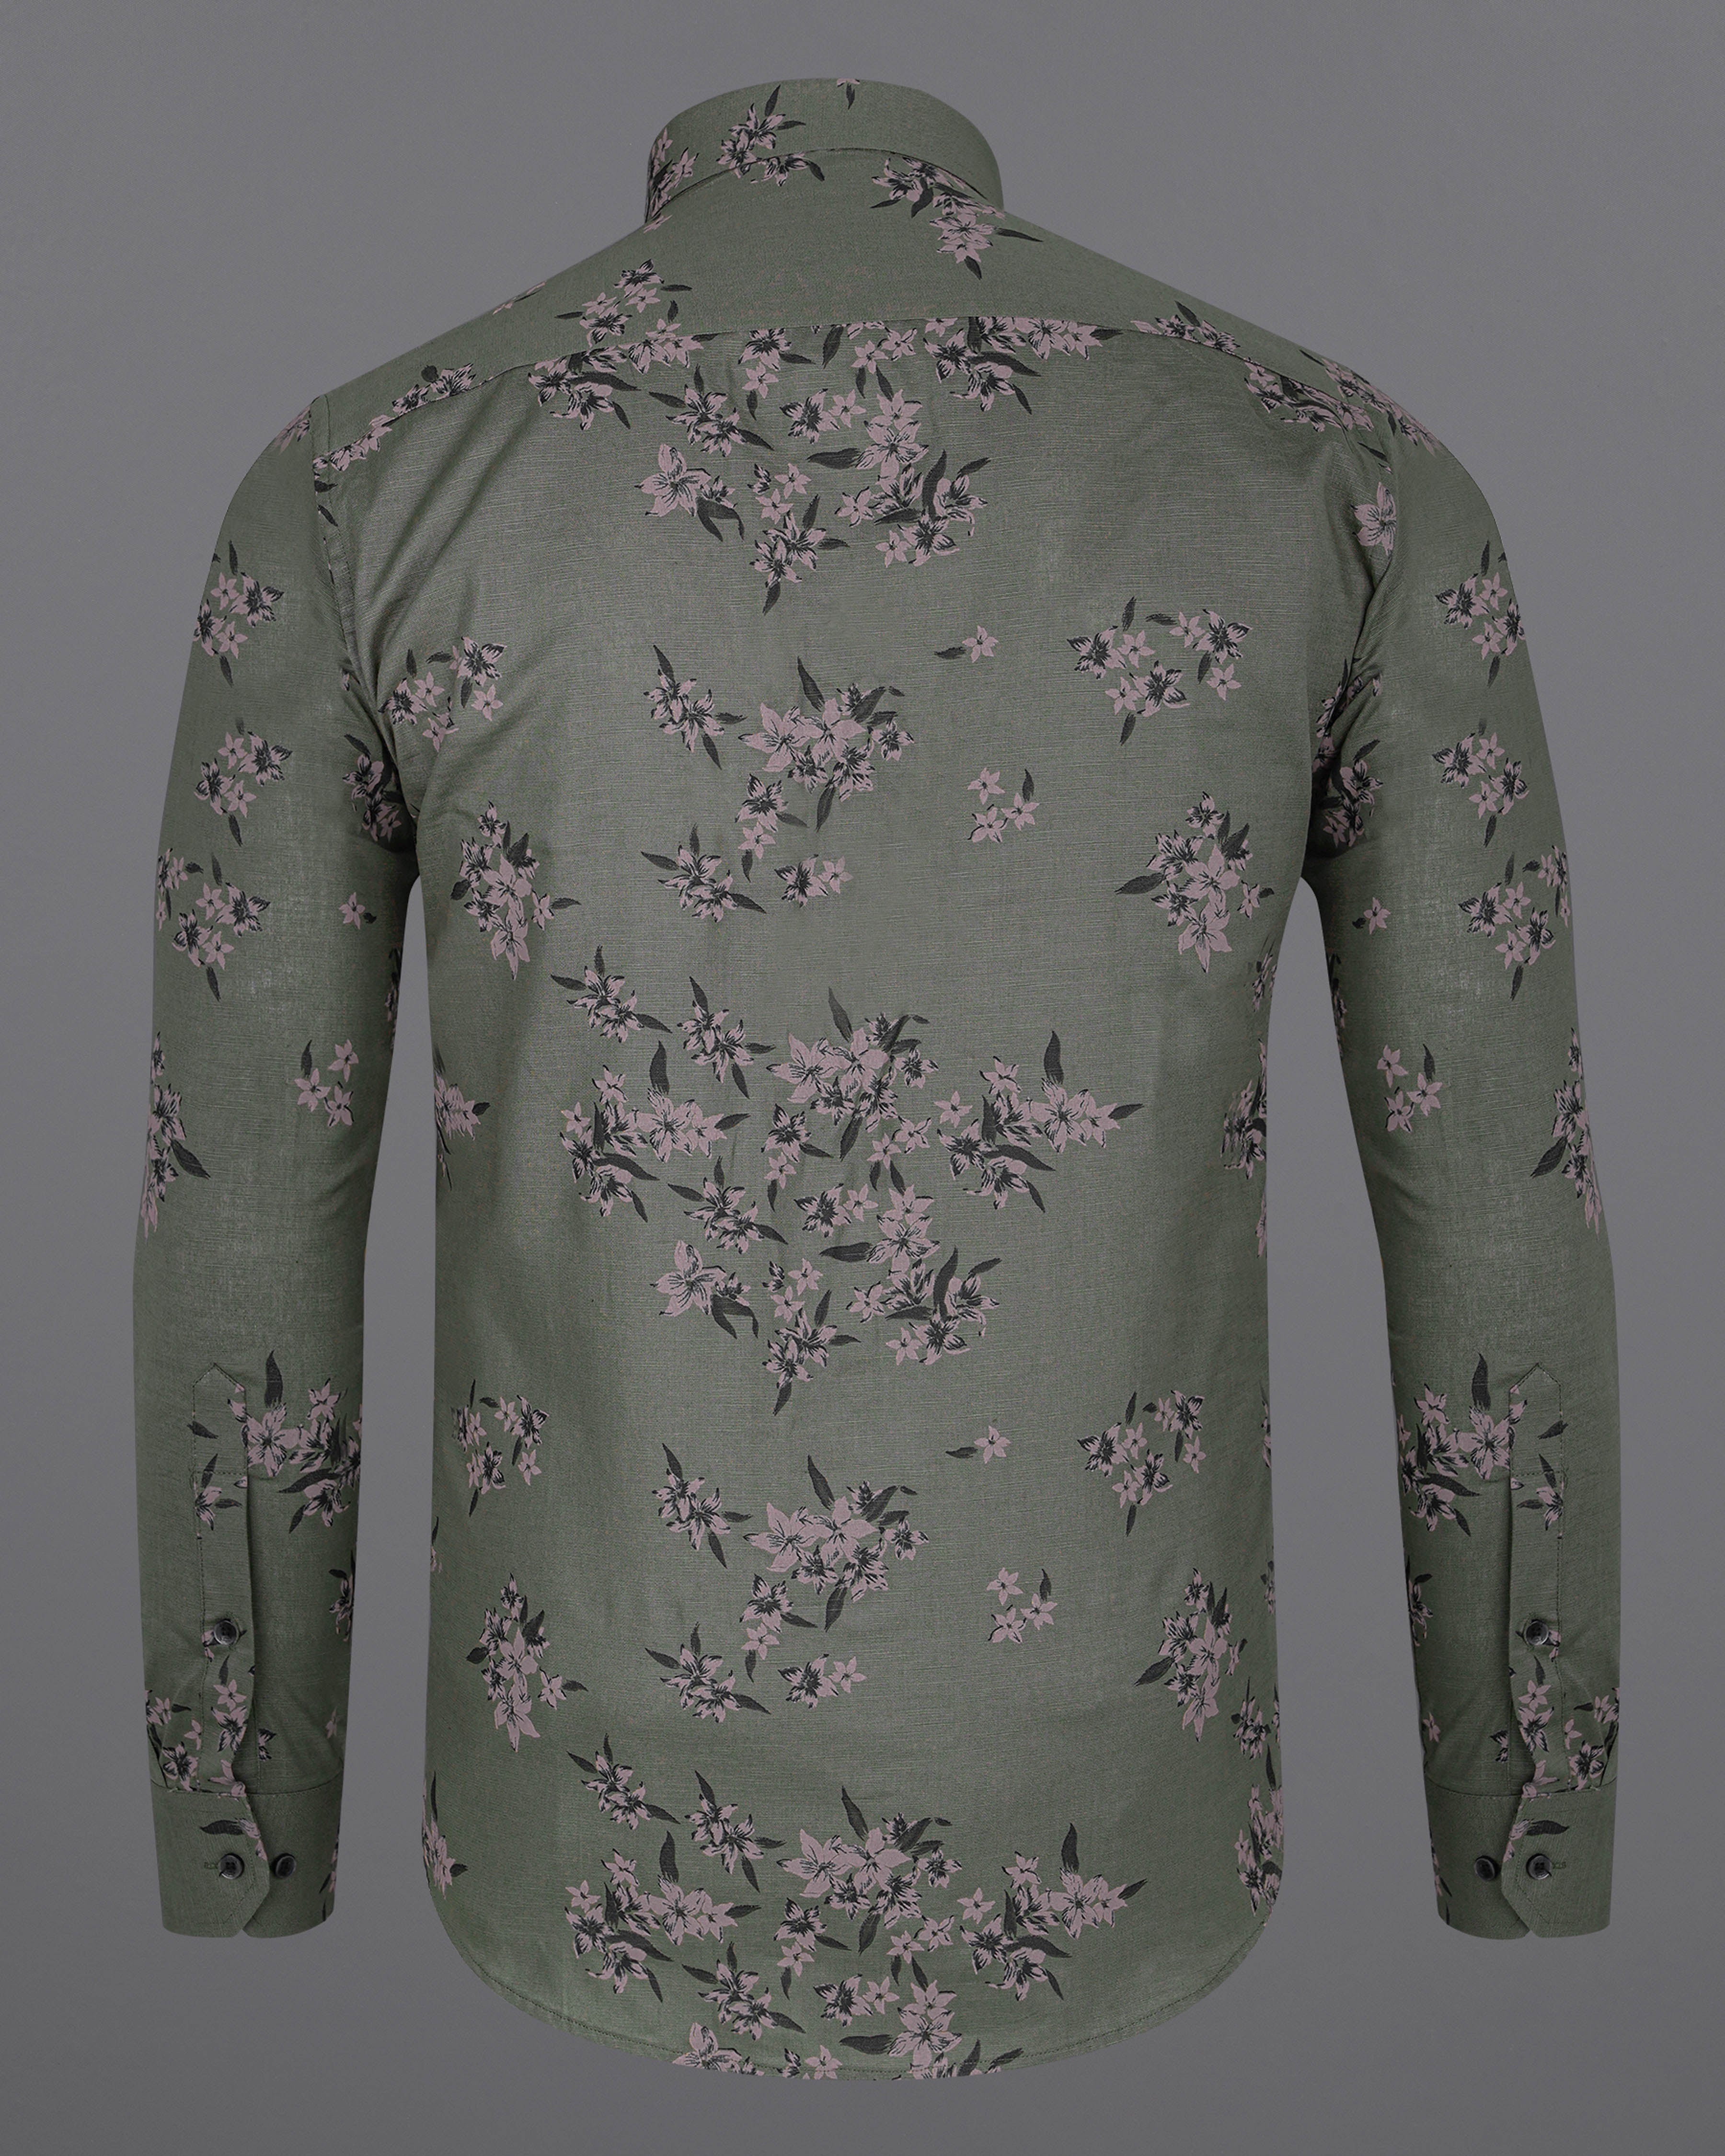 Fuscous Green With Floral Printed Luxurious Linen Shirt 8074-BLK-38, 8074-BLK-H-38, 8074-BLK-39, 8074-BLK-H-39, 8074-BLK-40, 8074-BLK-H-40, 8074-BLK-42, 8074-BLK-H-42, 8074-BLK-44, 8074-BLK-H-44, 8074-BLK-46, 8074-BLK-H-46, 8074-BLK-48, 8074-BLK-H-48, 8074-BLK-50, 8074-BLK-H-50, 8074-BLK-52, 8074-BLK-H-52